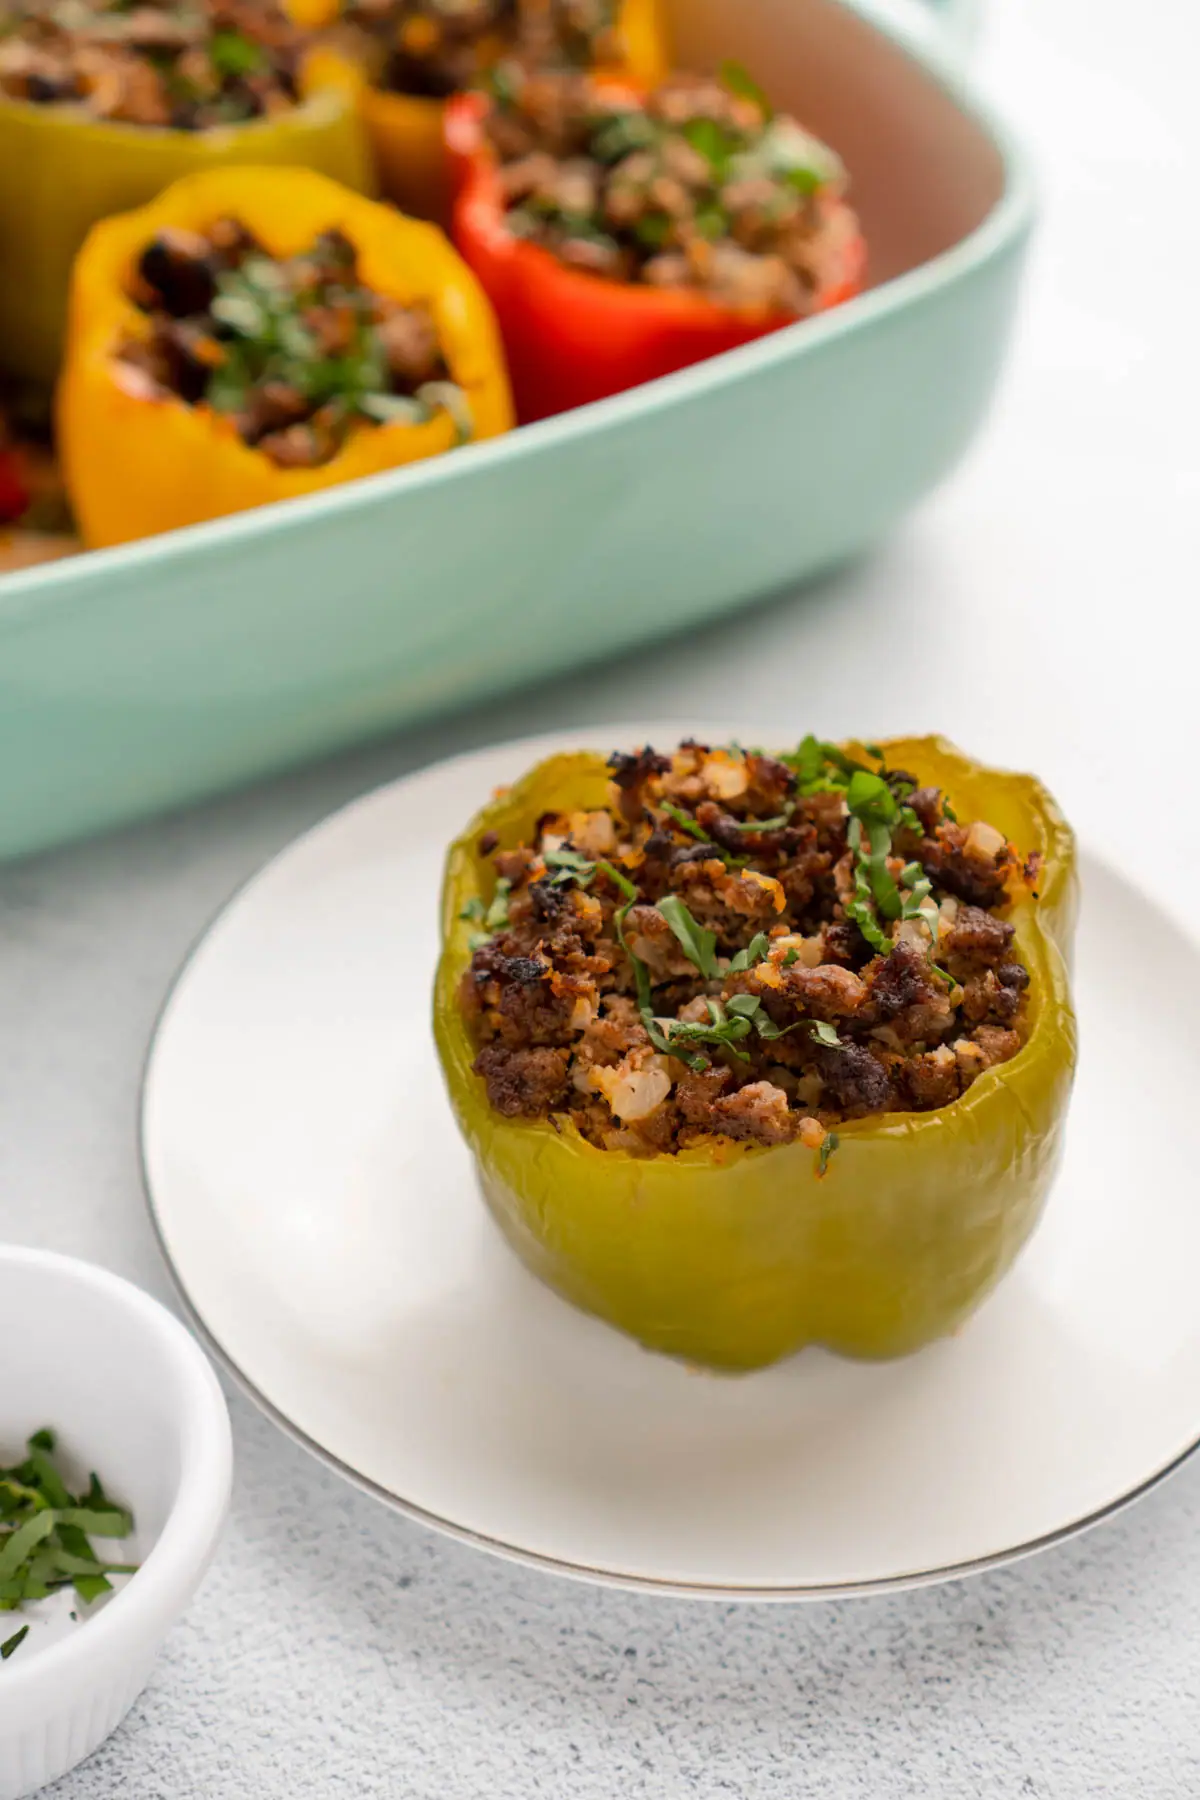 A stuffed green bell pepper on a plate, ready to serve.